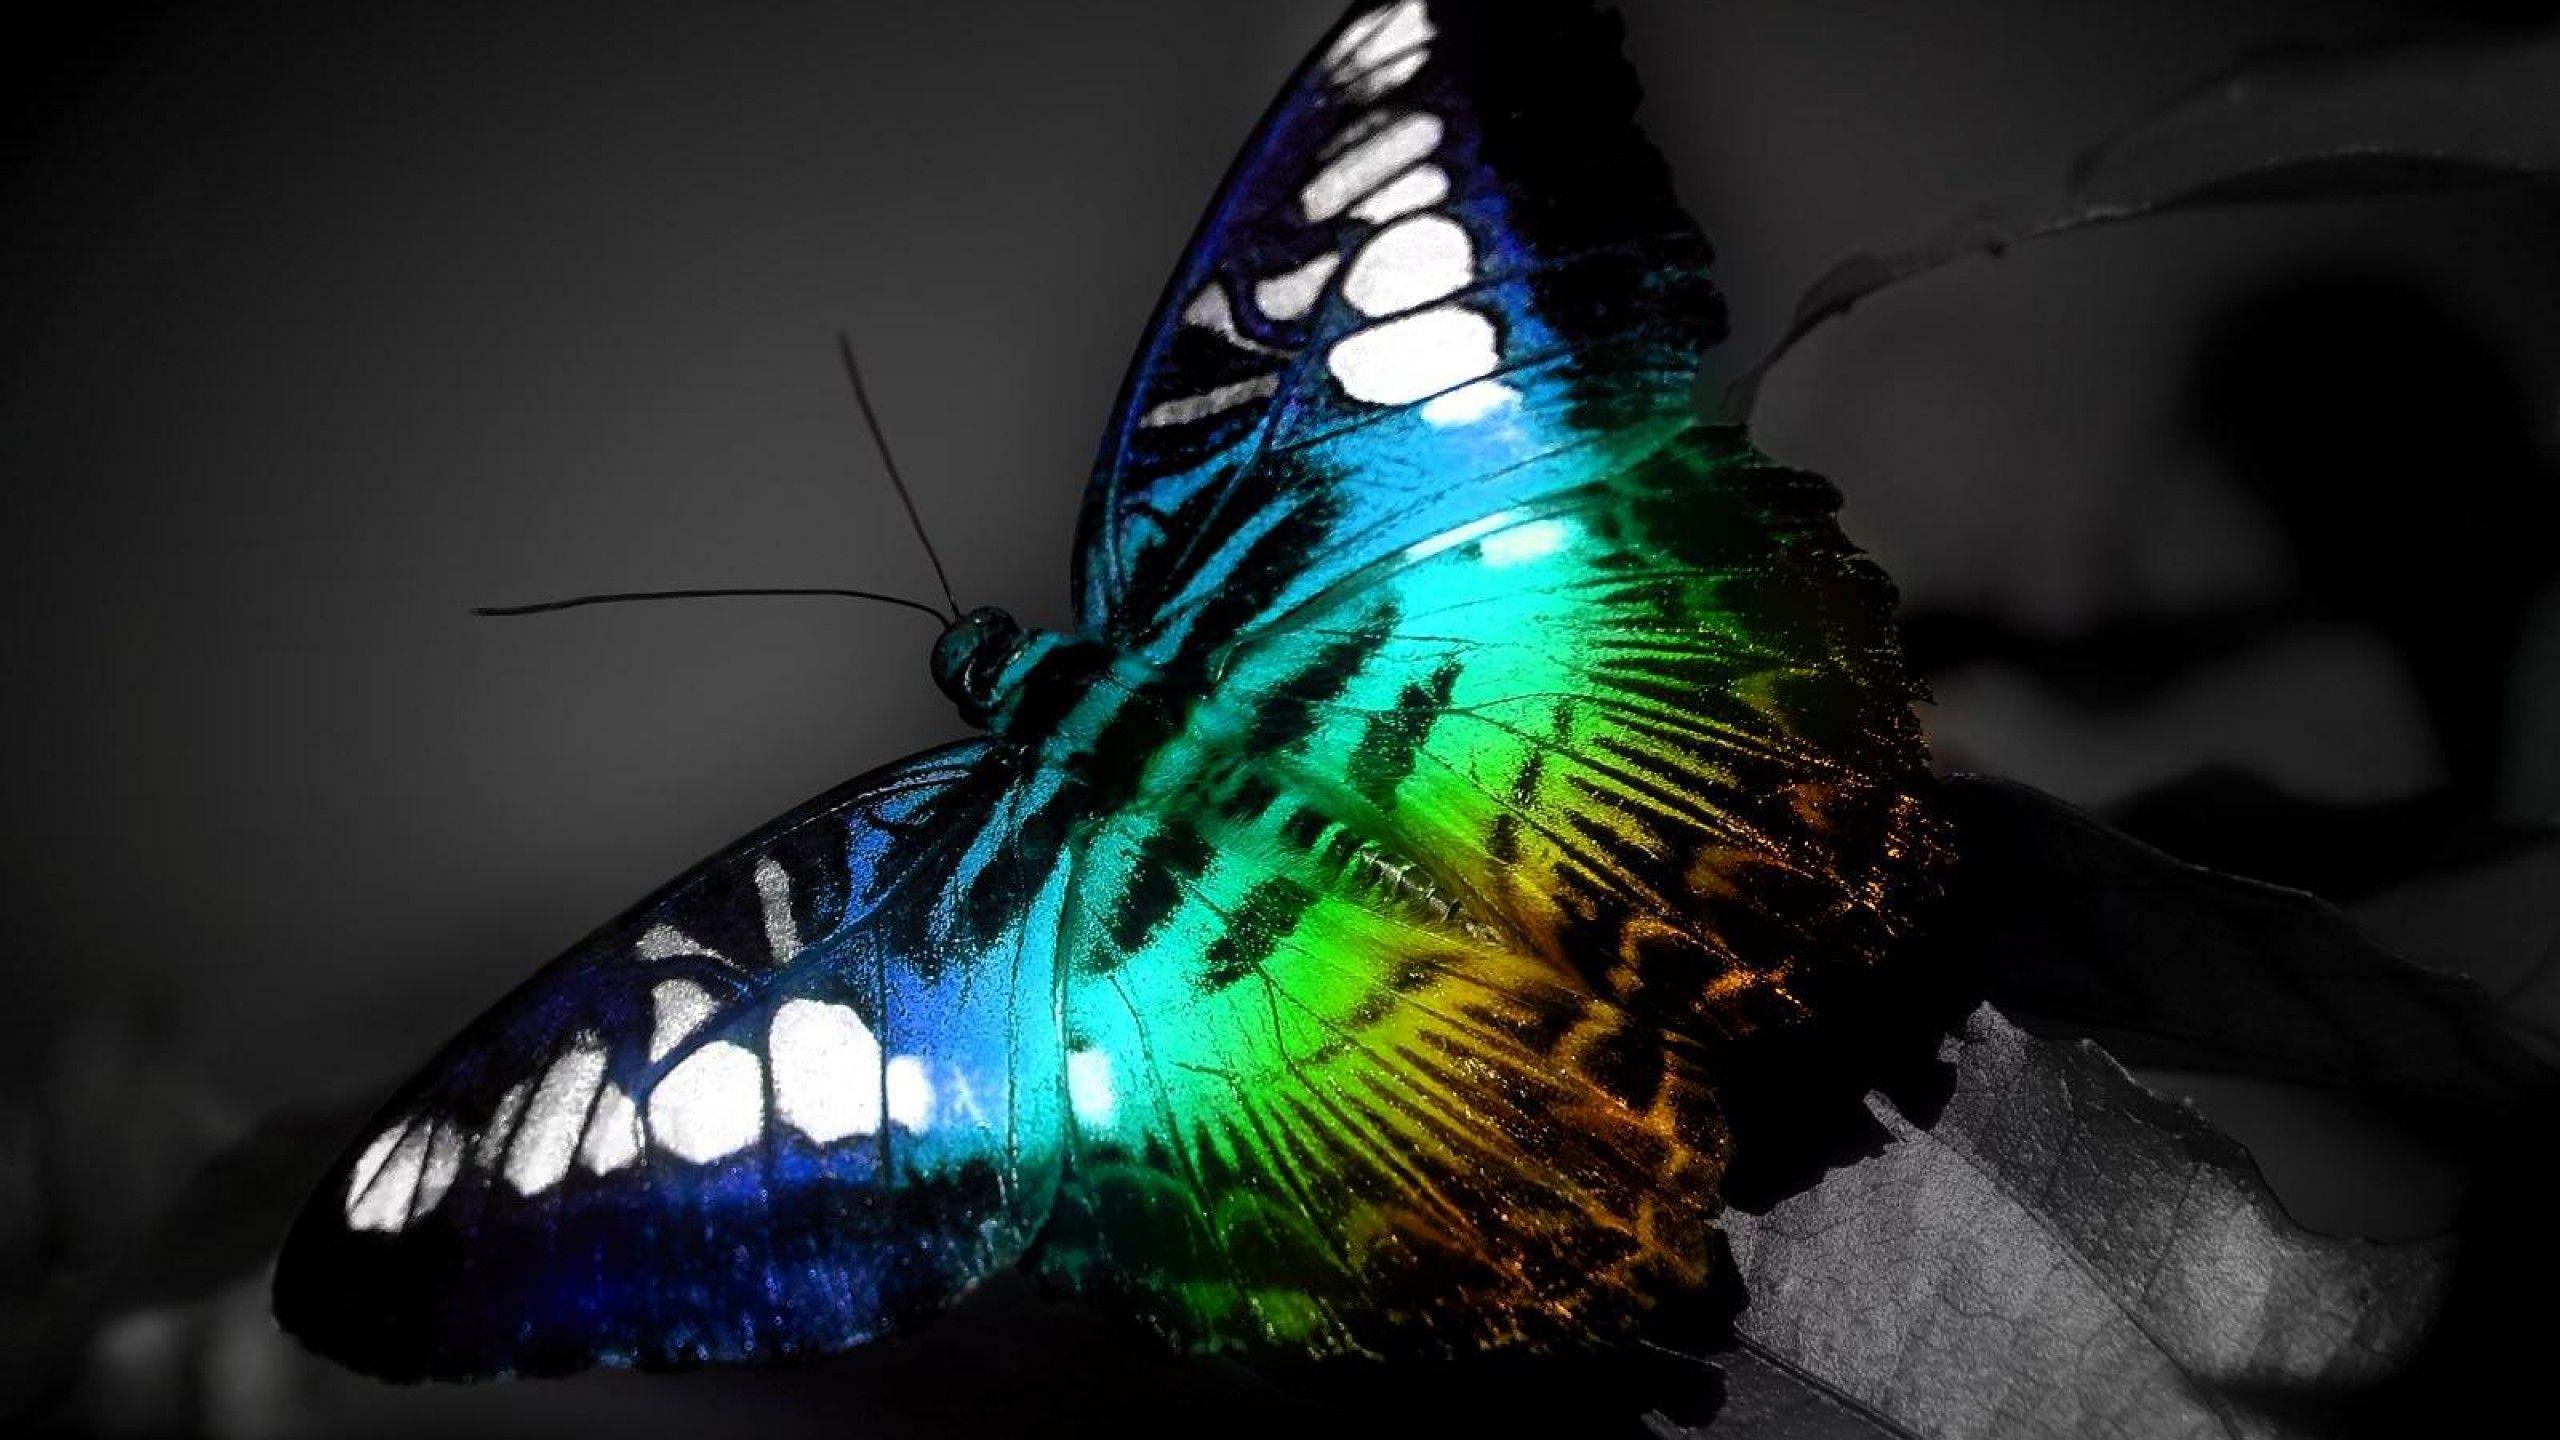 Butterfly HD Wallpapers - Wallpaper Cave